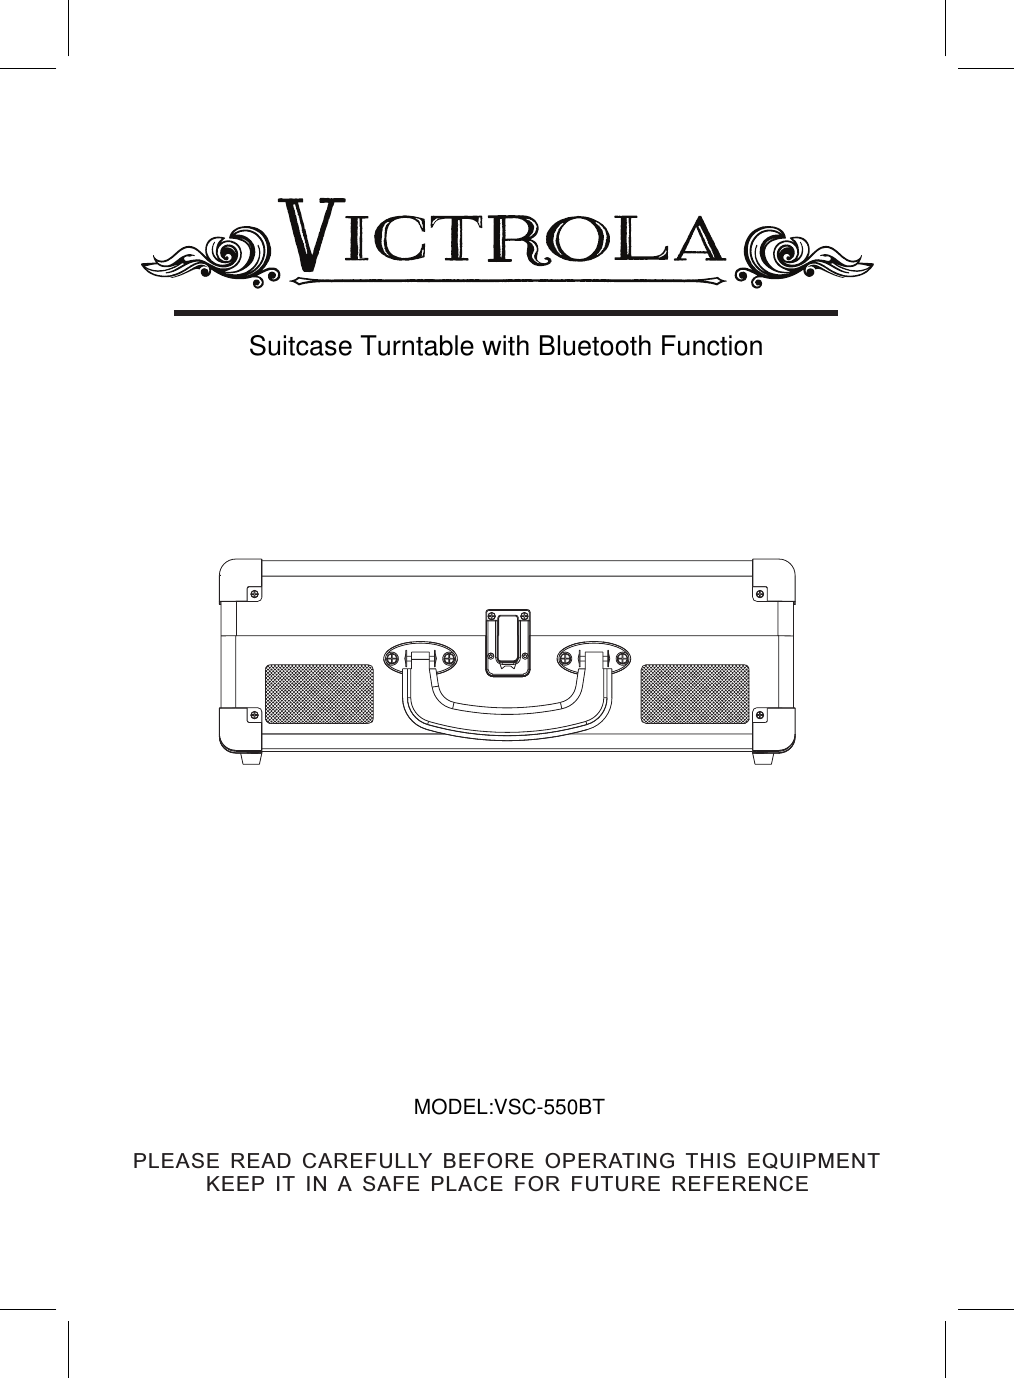 Suitcase Turntable with Bluetooth FunctionMODEL:VSC-550BTPLEASE READ CAREFULLY BEFORE OPERATING THIS EQUIPMENT KEEP IT IN A SAFE PLACE FOR FUTURE REFERENCE